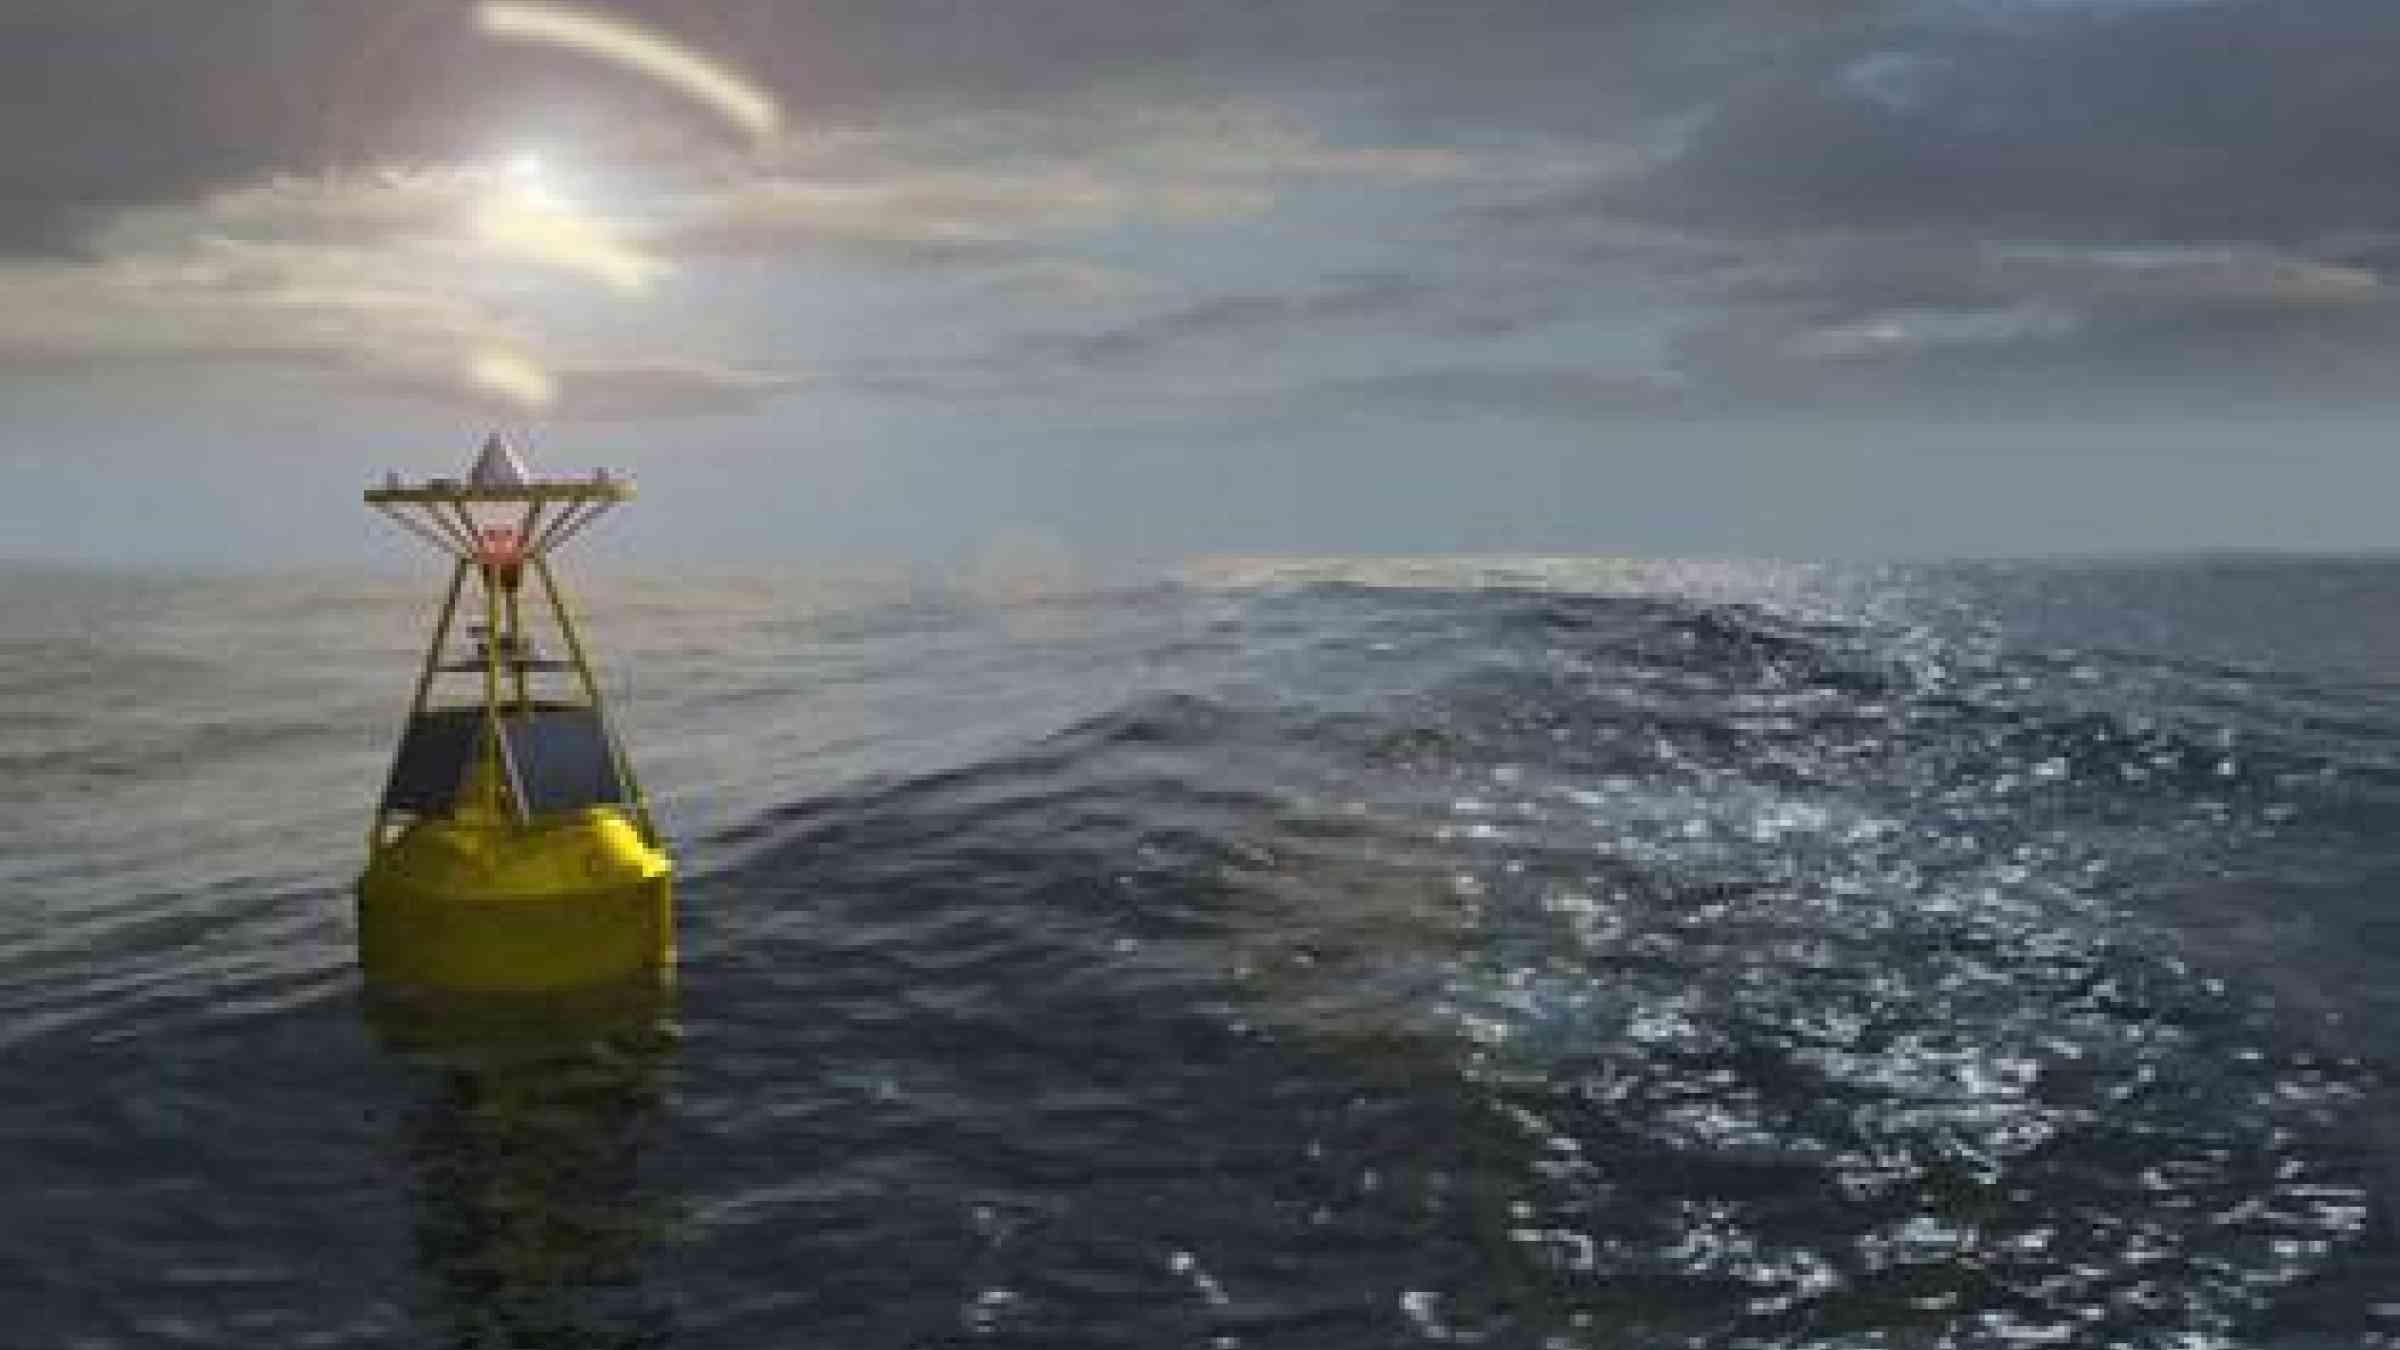 Indian Ocean tsunami early warning system was designed to combine data from underwater probes, orbiting global positioning system satellites, and floating buoys, to better detect a coming tidal wave.